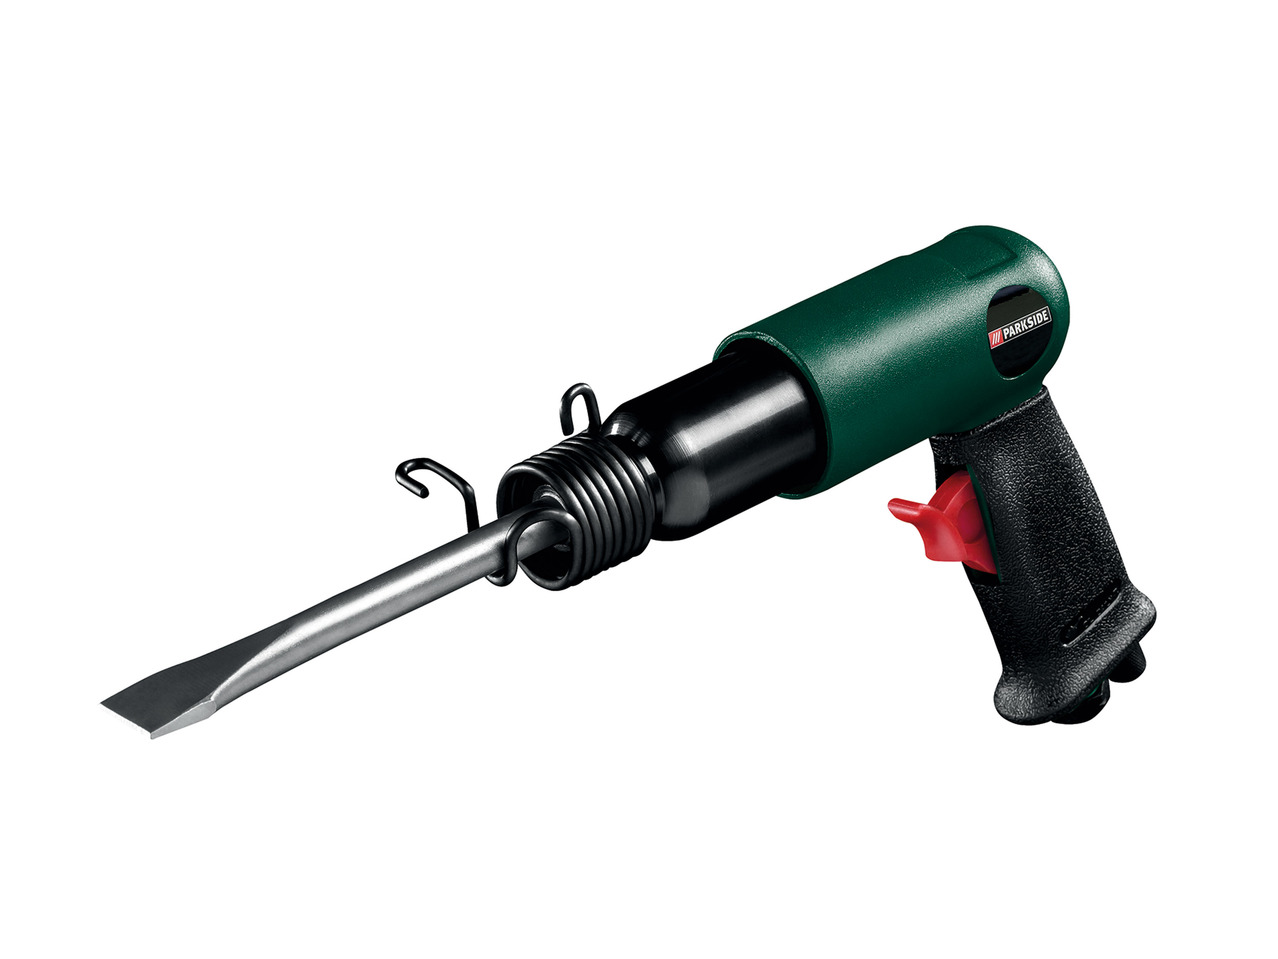 Parkside Chipping Hammer, Saw or Pneumatic Drill1